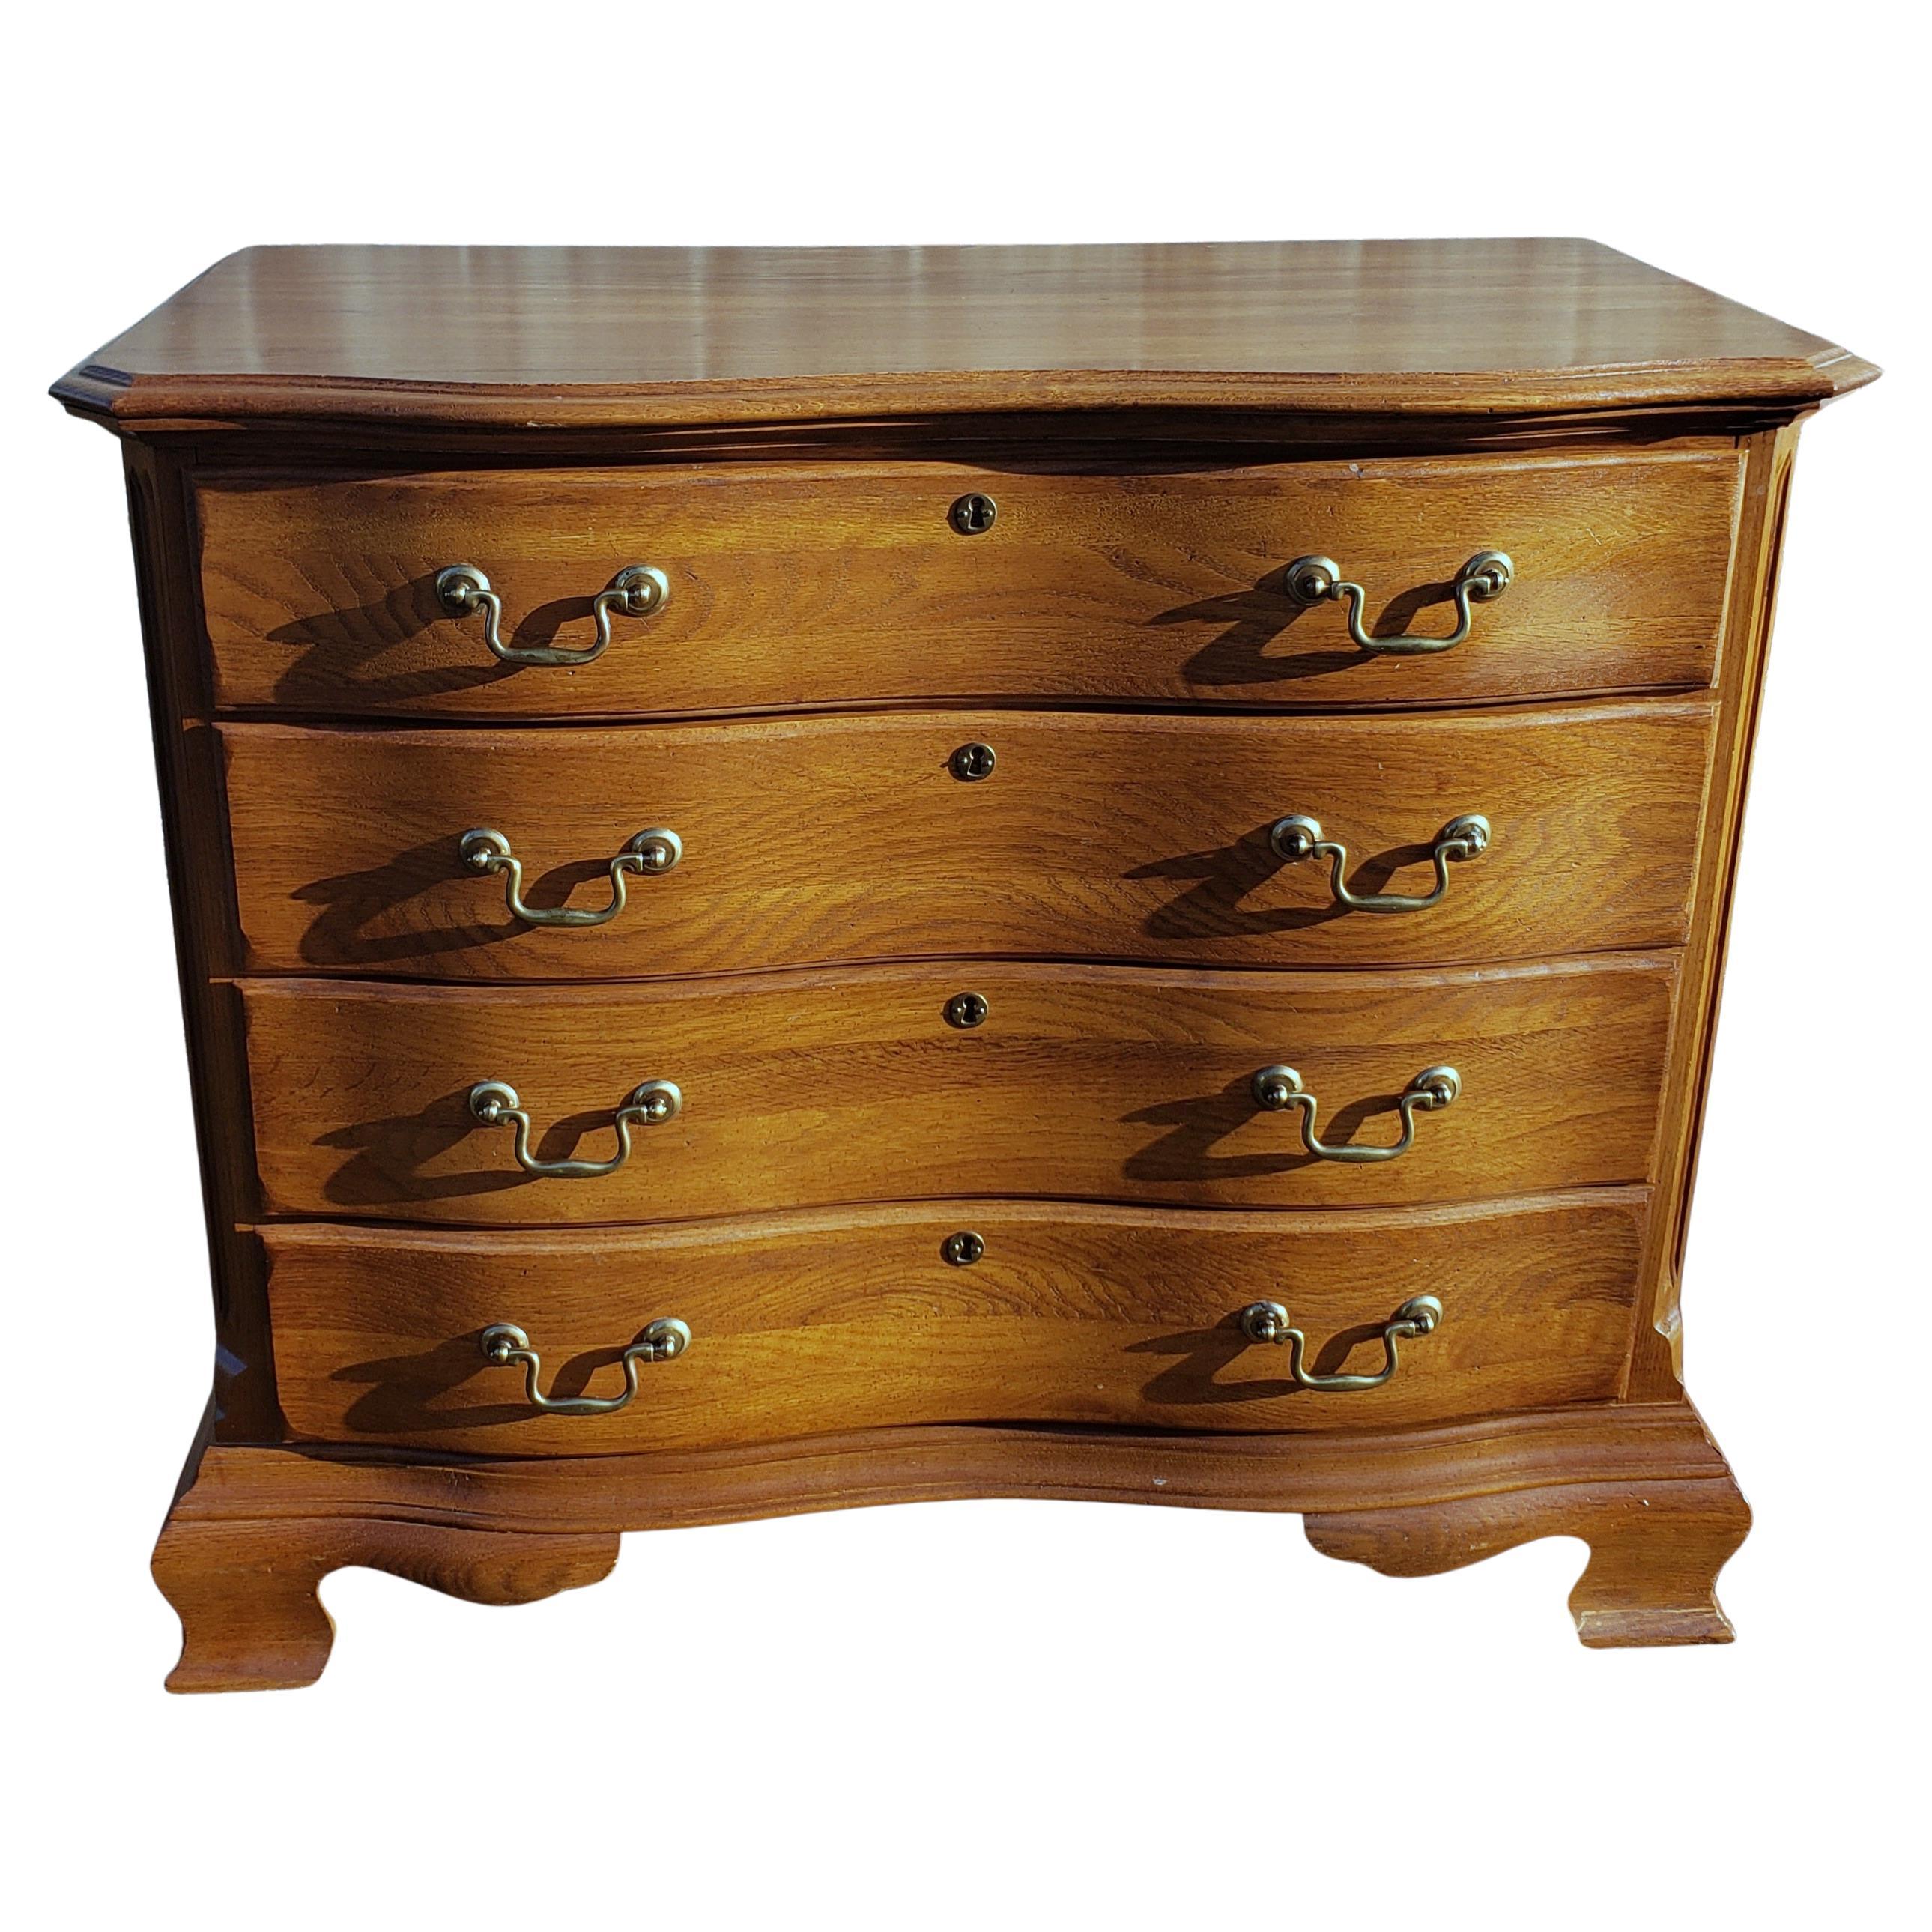 Late 20th C. Kincaid Chippendale Solid Oak Chest of Drawers